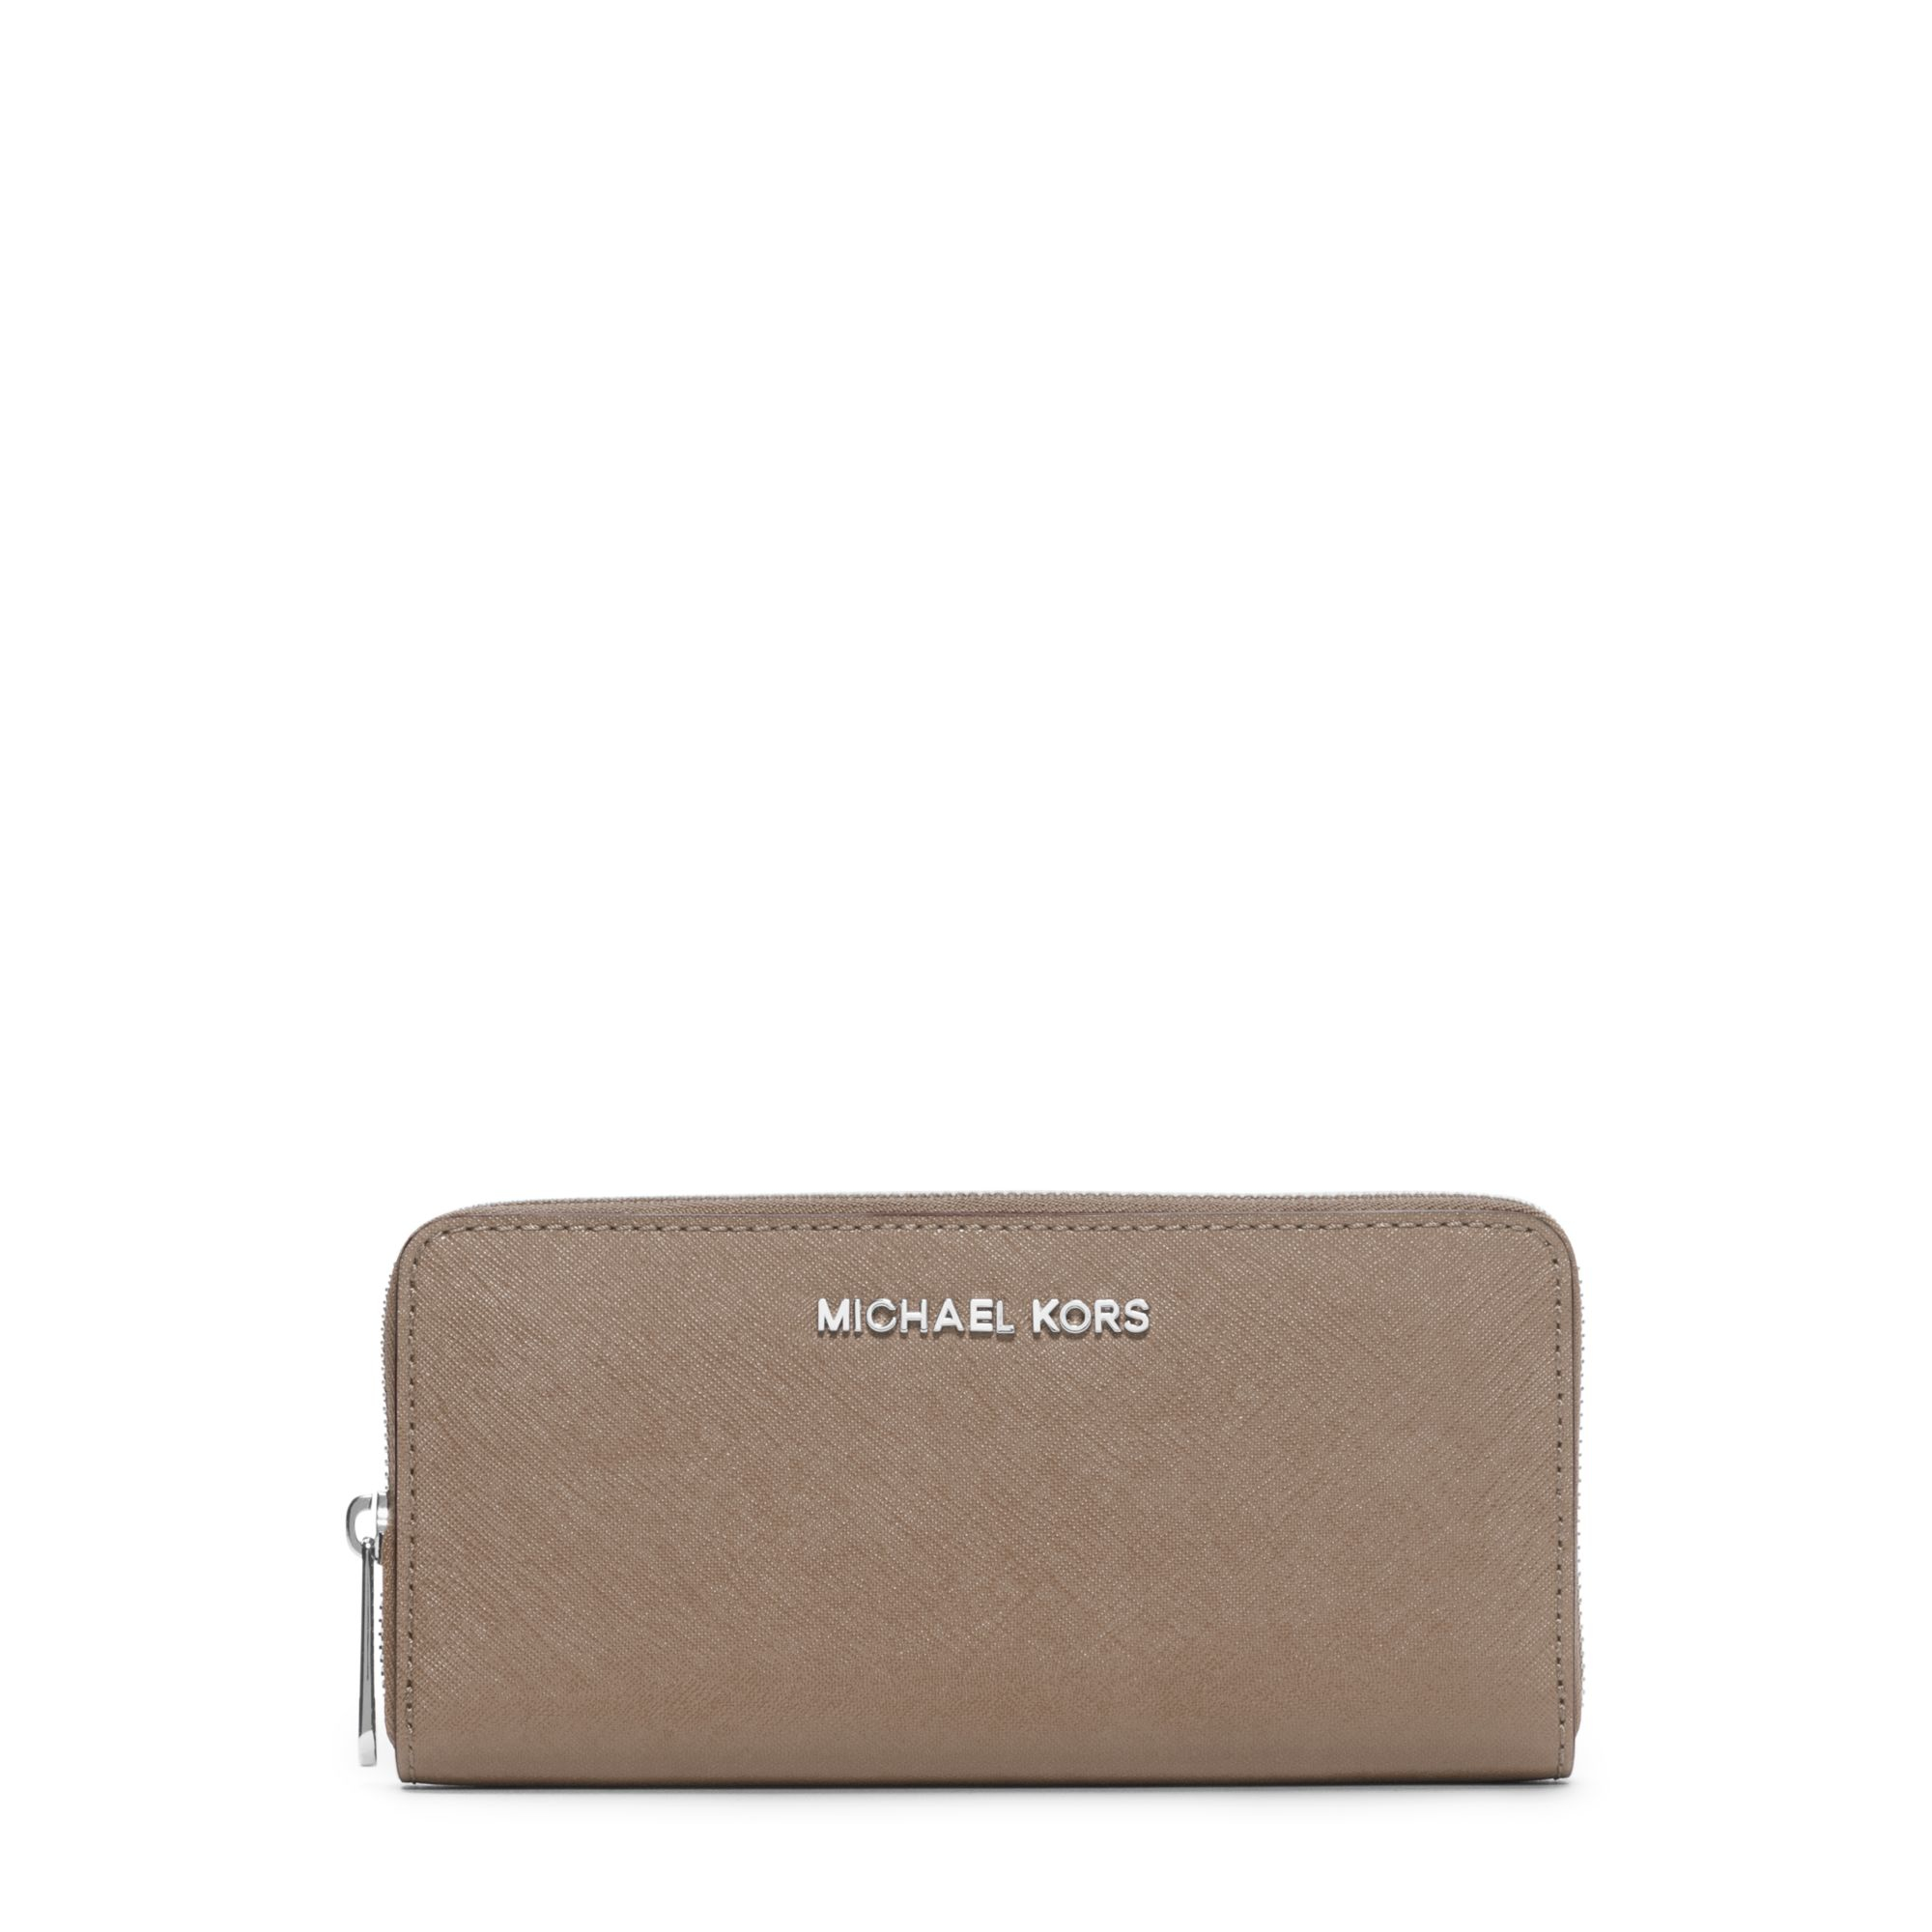 Michael Kors Jet Set Travel Saffiano Leather Continental Wallet in Brown |  Lyst